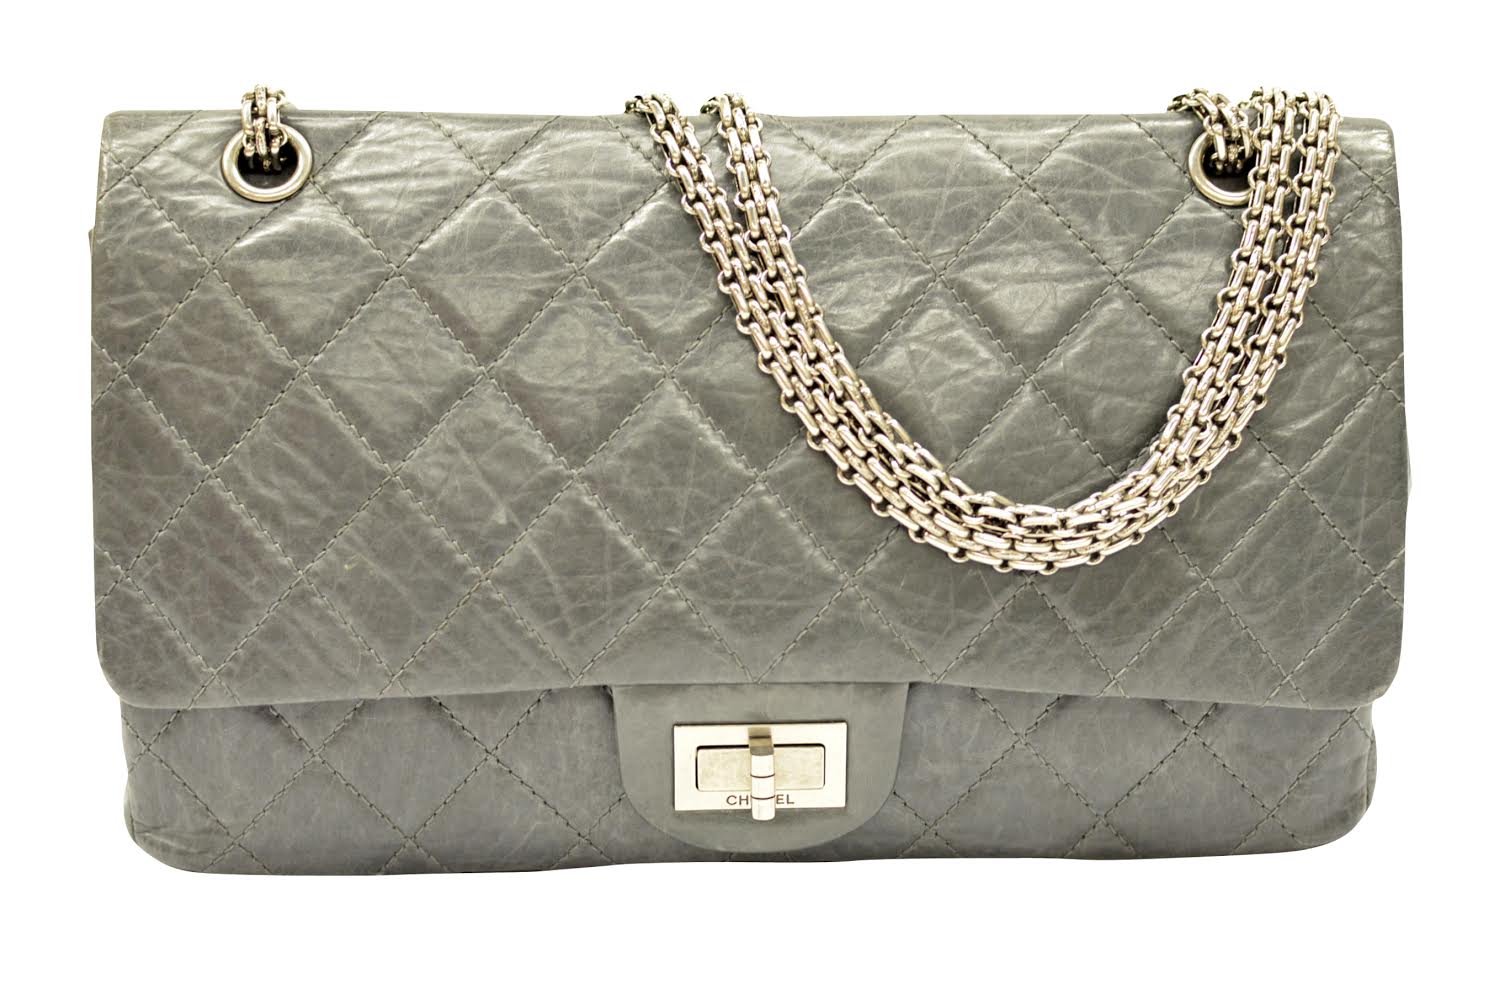 Influx of Pre-owned Chanel Handbags Hits Luxury Resale Site www.bagssaleusa.com